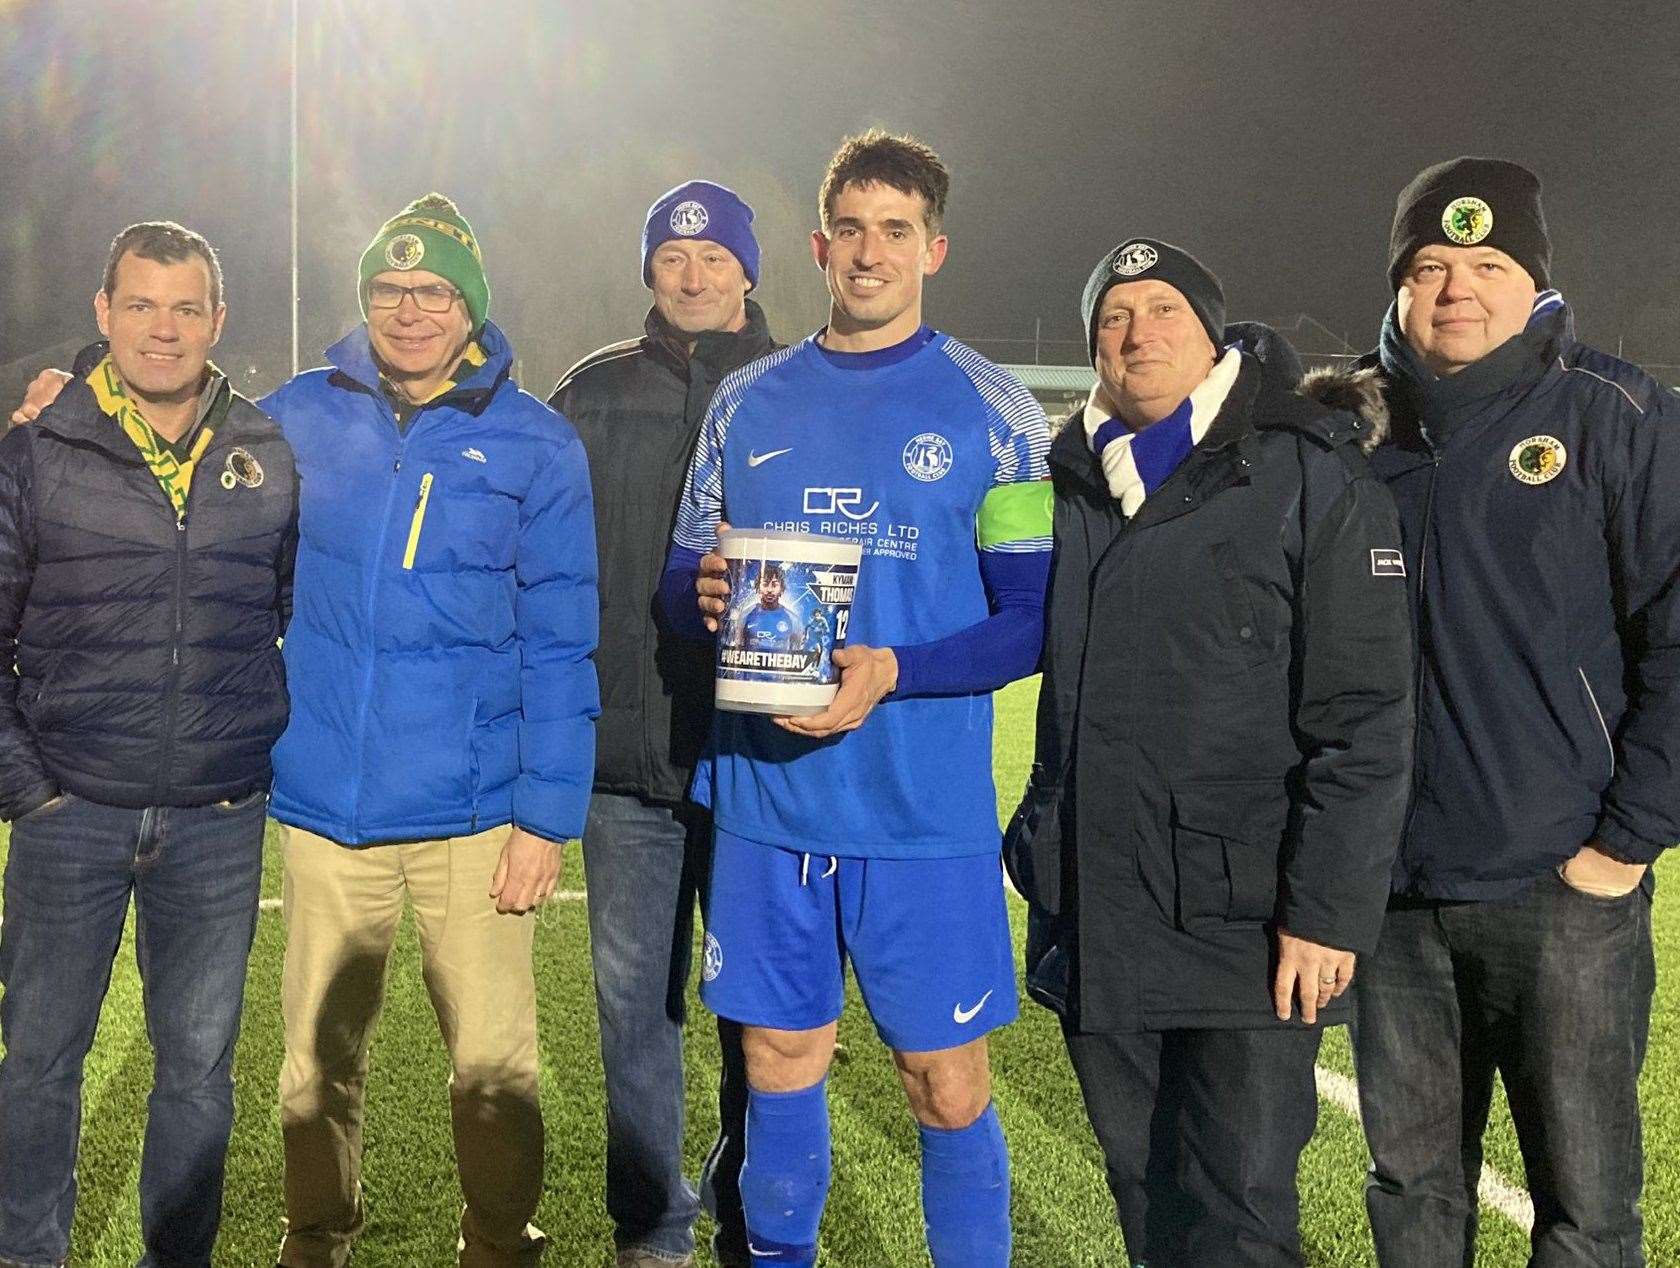 Herne Bay captain Laurence Harvey is presented with funds to support injured striker Kymani Thomas' recovery by officials from Herne Bay and opponents Horsham